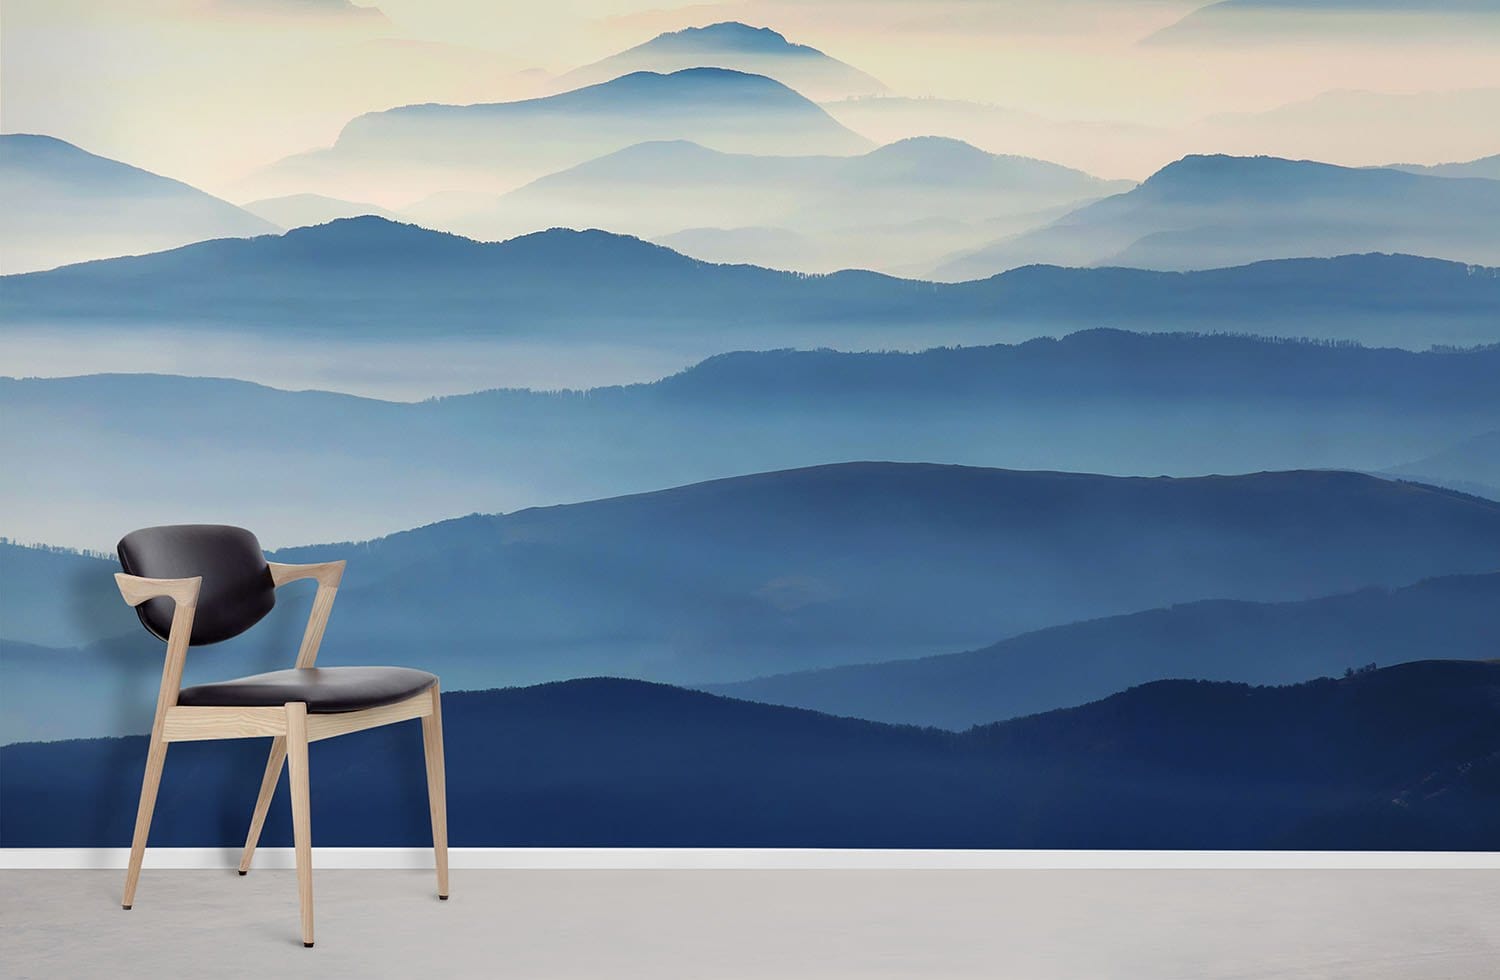 Wallpaper mural featuring blue rolling mountains, perfect for home decoration